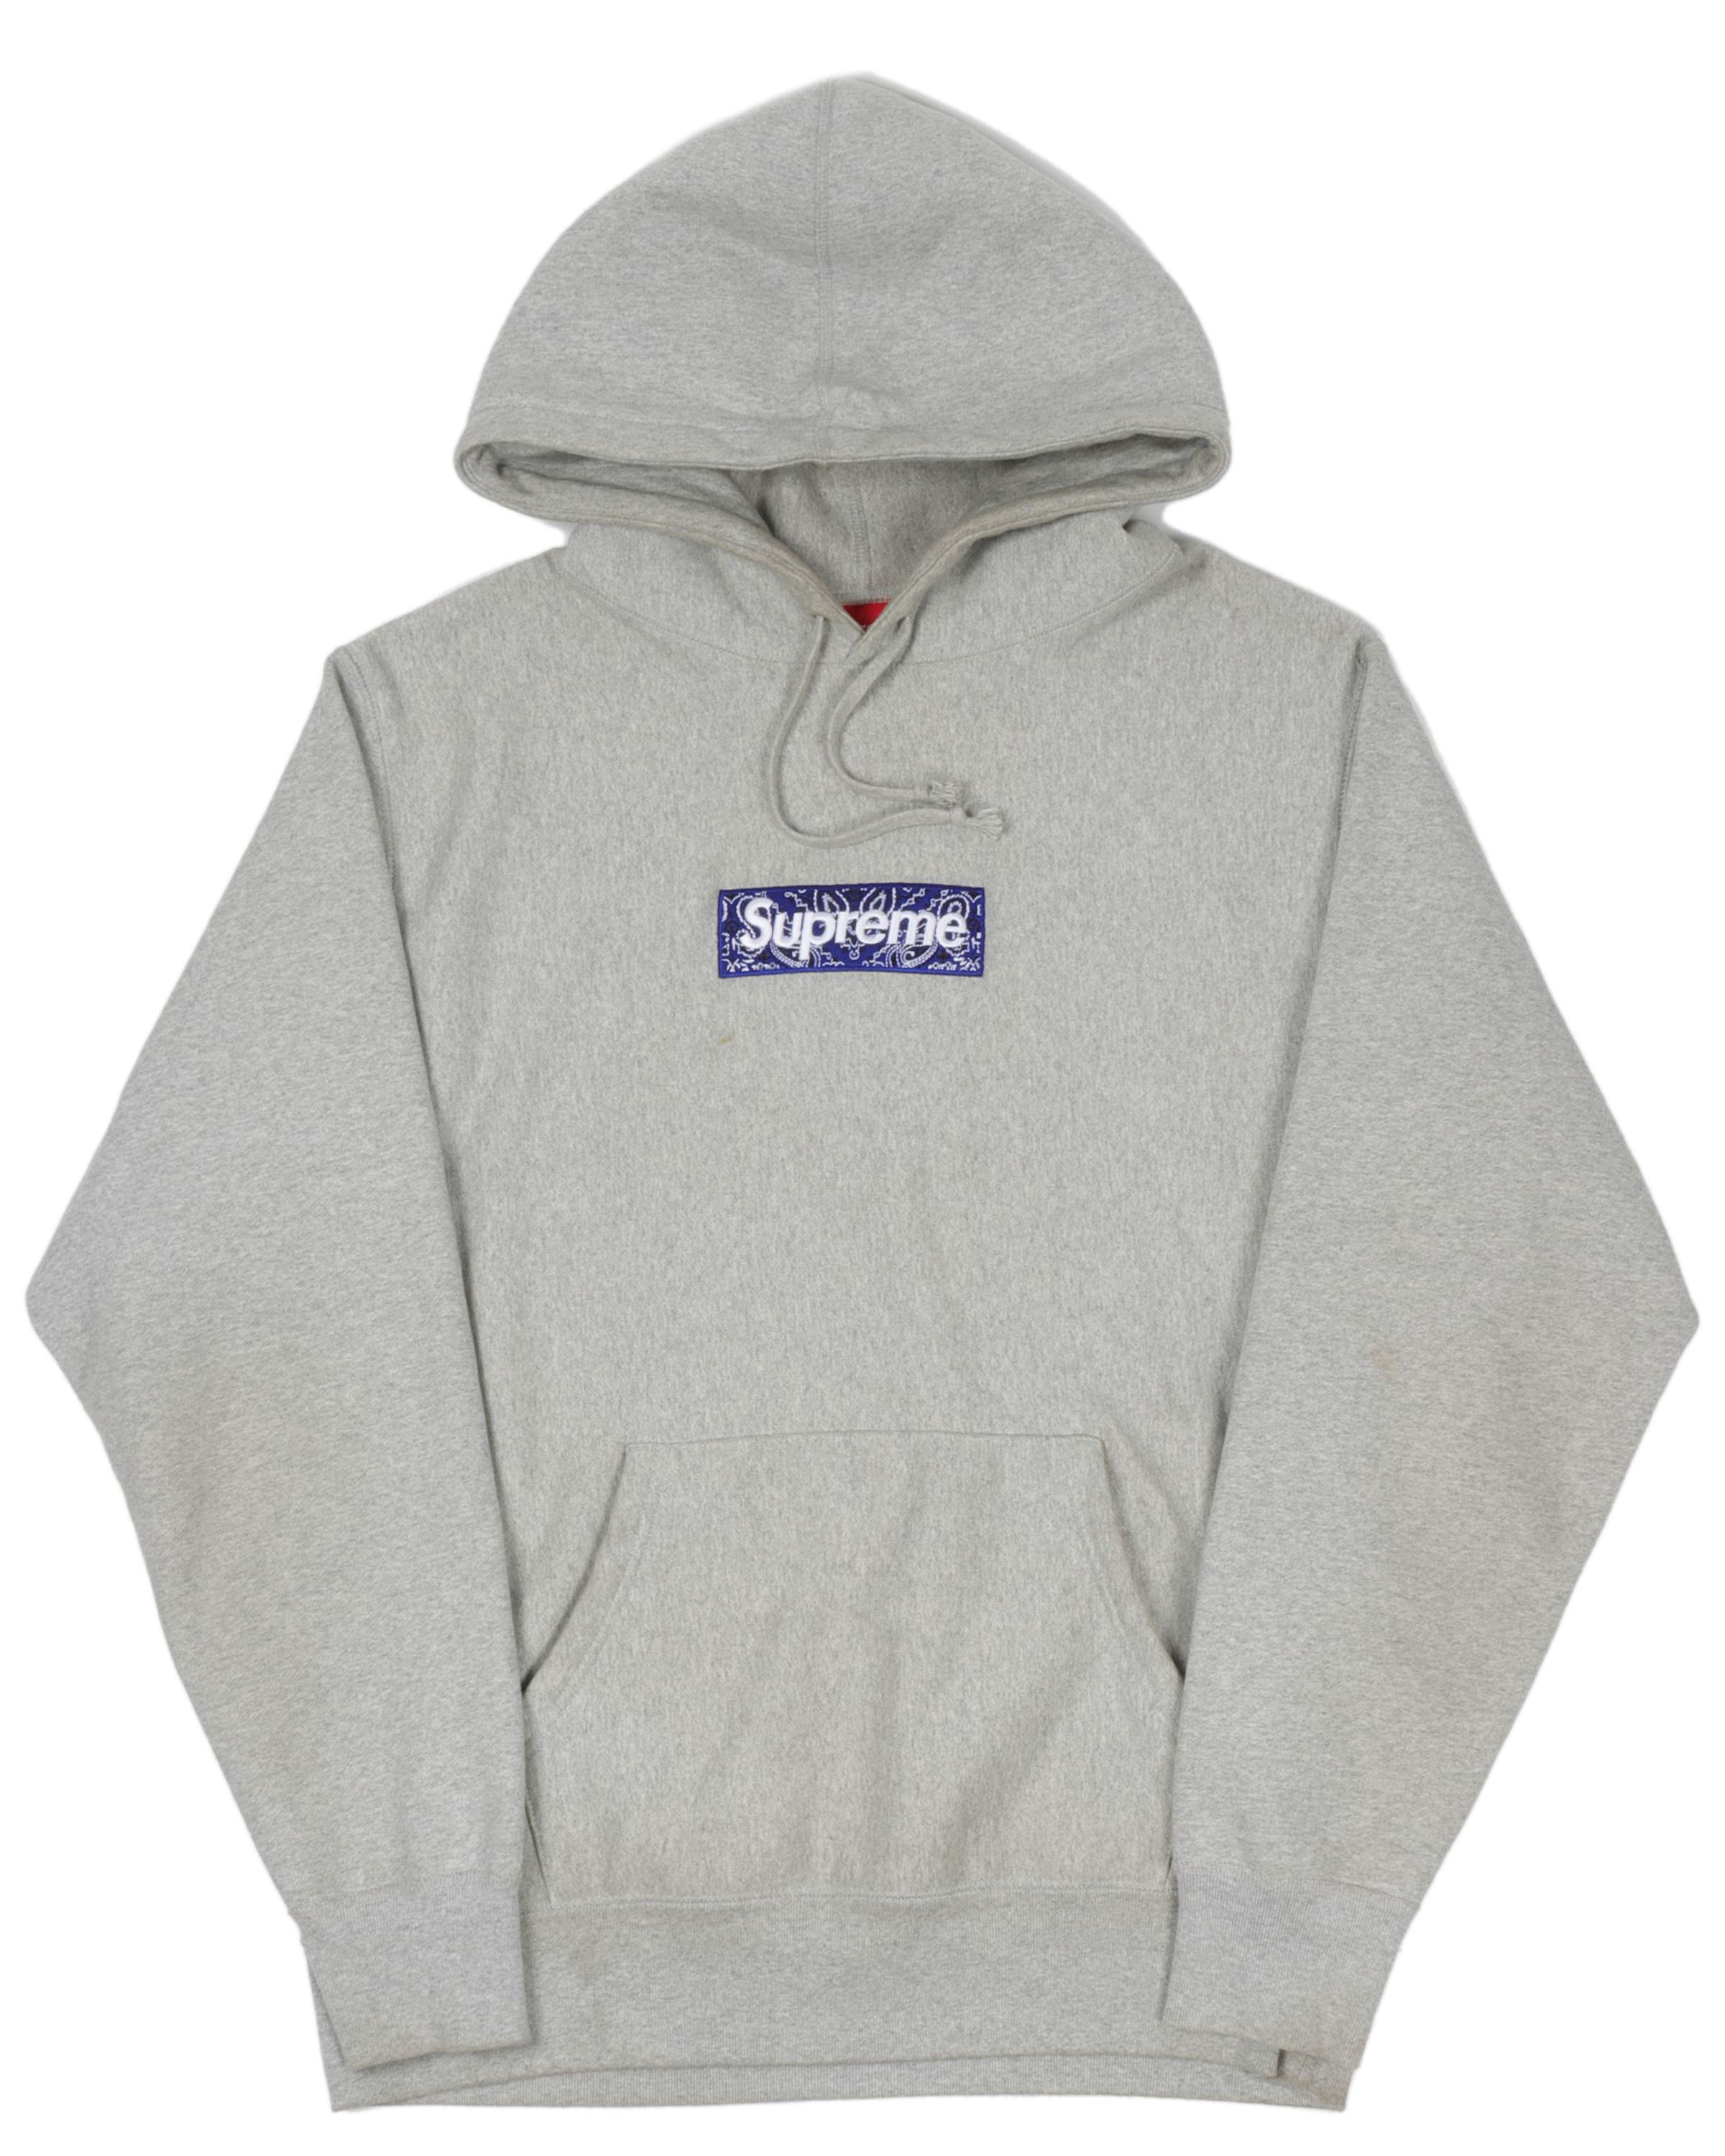 Supreme Queues Up Embroidered Paisley Box Logo Hoodie